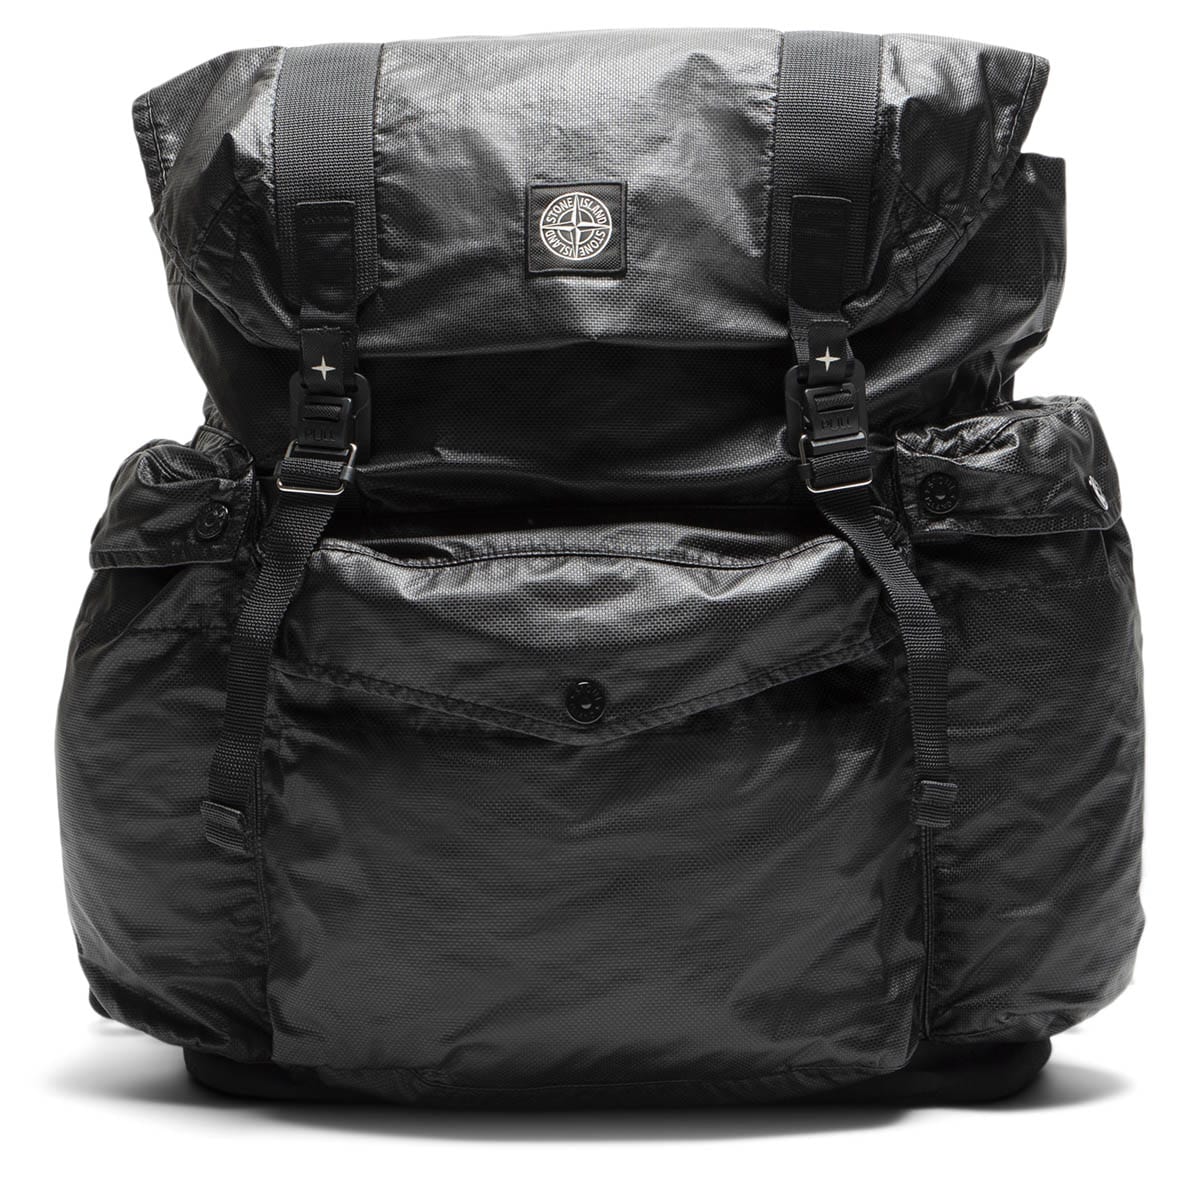 Stone Island Bags & Accessories V0029 / OS BACKPACK 741590370